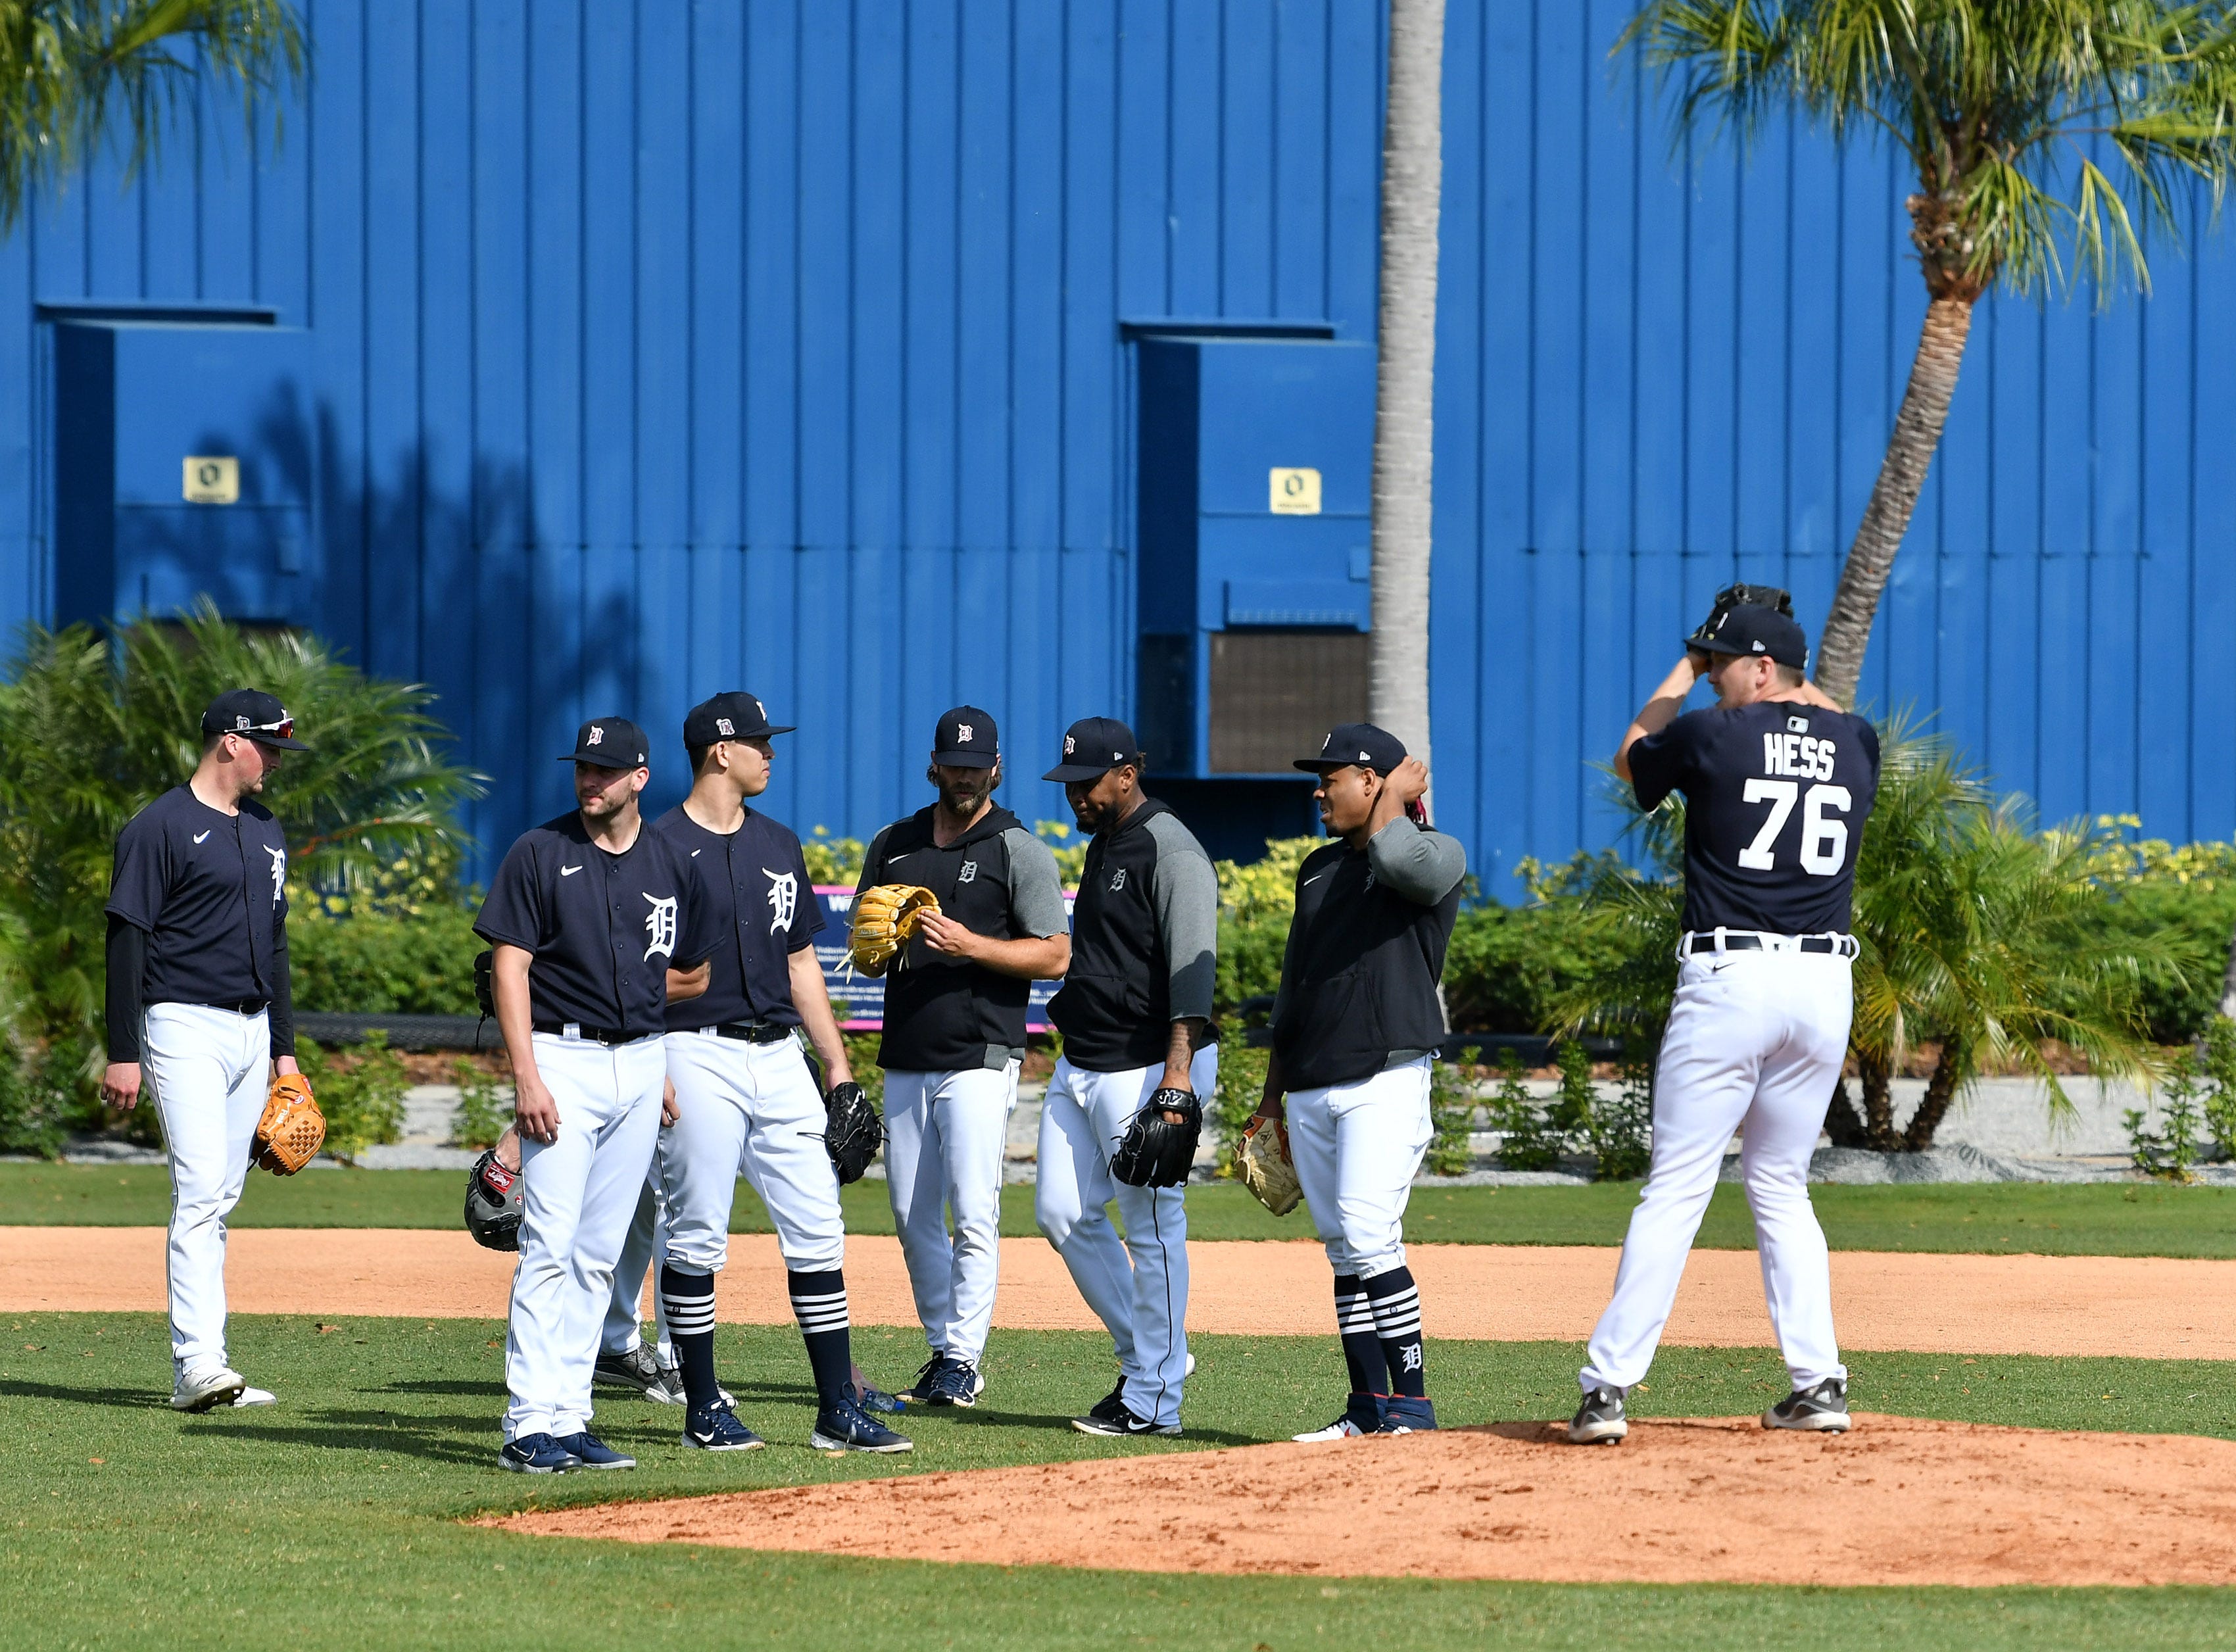 Tigers pitcher wait their turn as Zack Hess (76) goes through an infield drill.